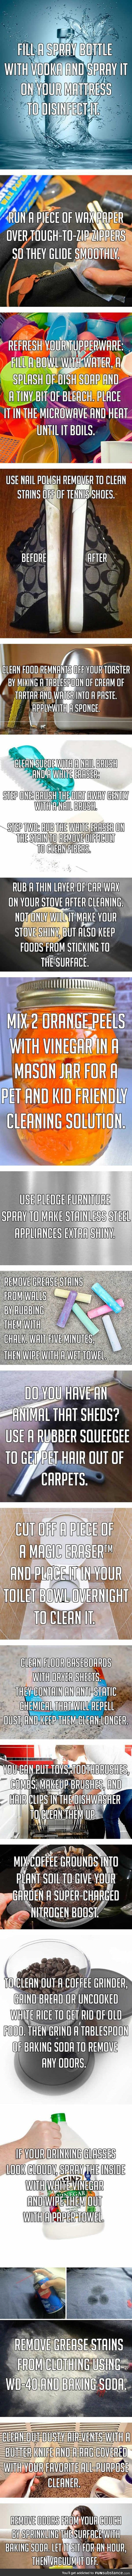 Cleaning hacks to make your house sparkle and shine